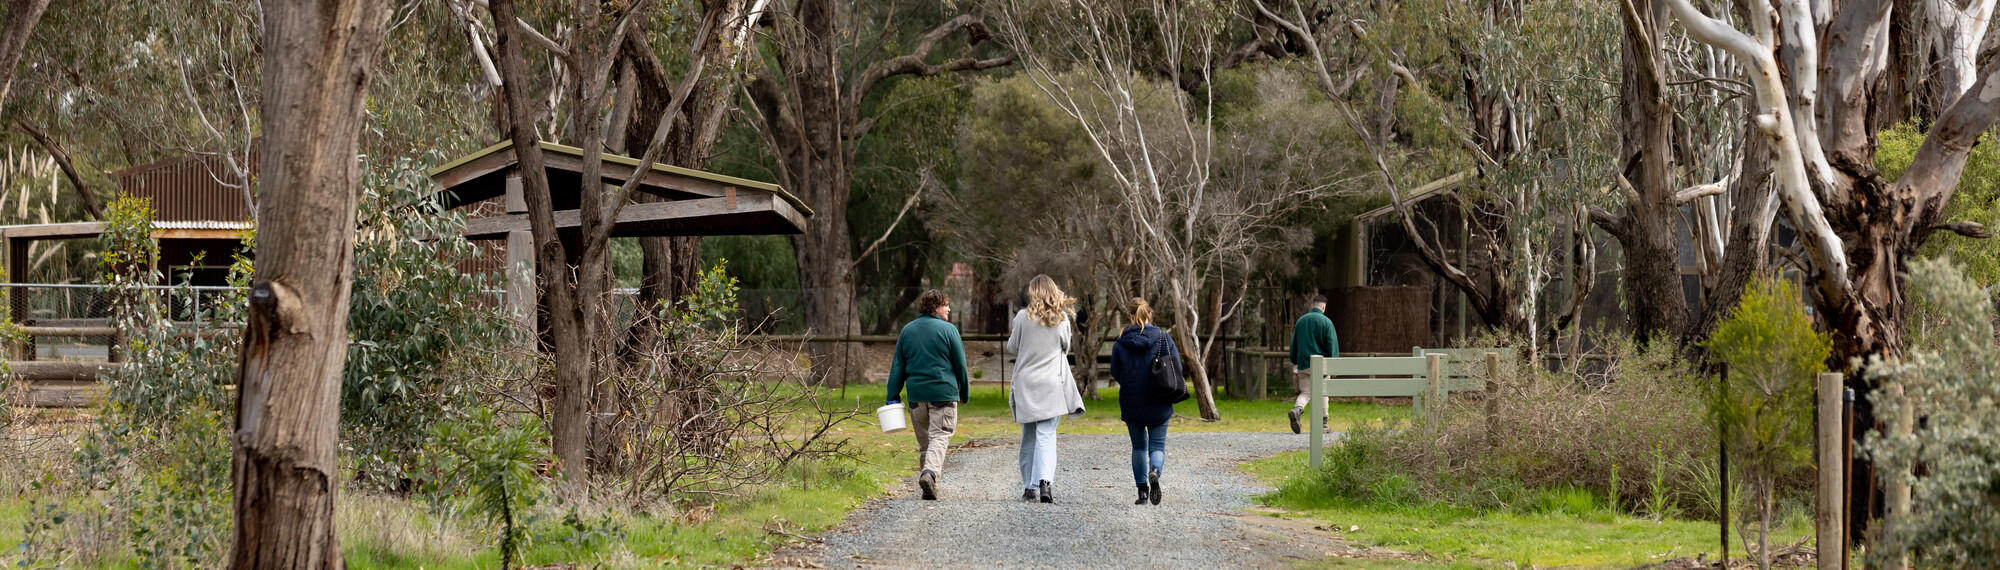 A rear view of two park staff in green jumpers and khaki pants walk down a tree-lined path alongside two other people in plain clothes.